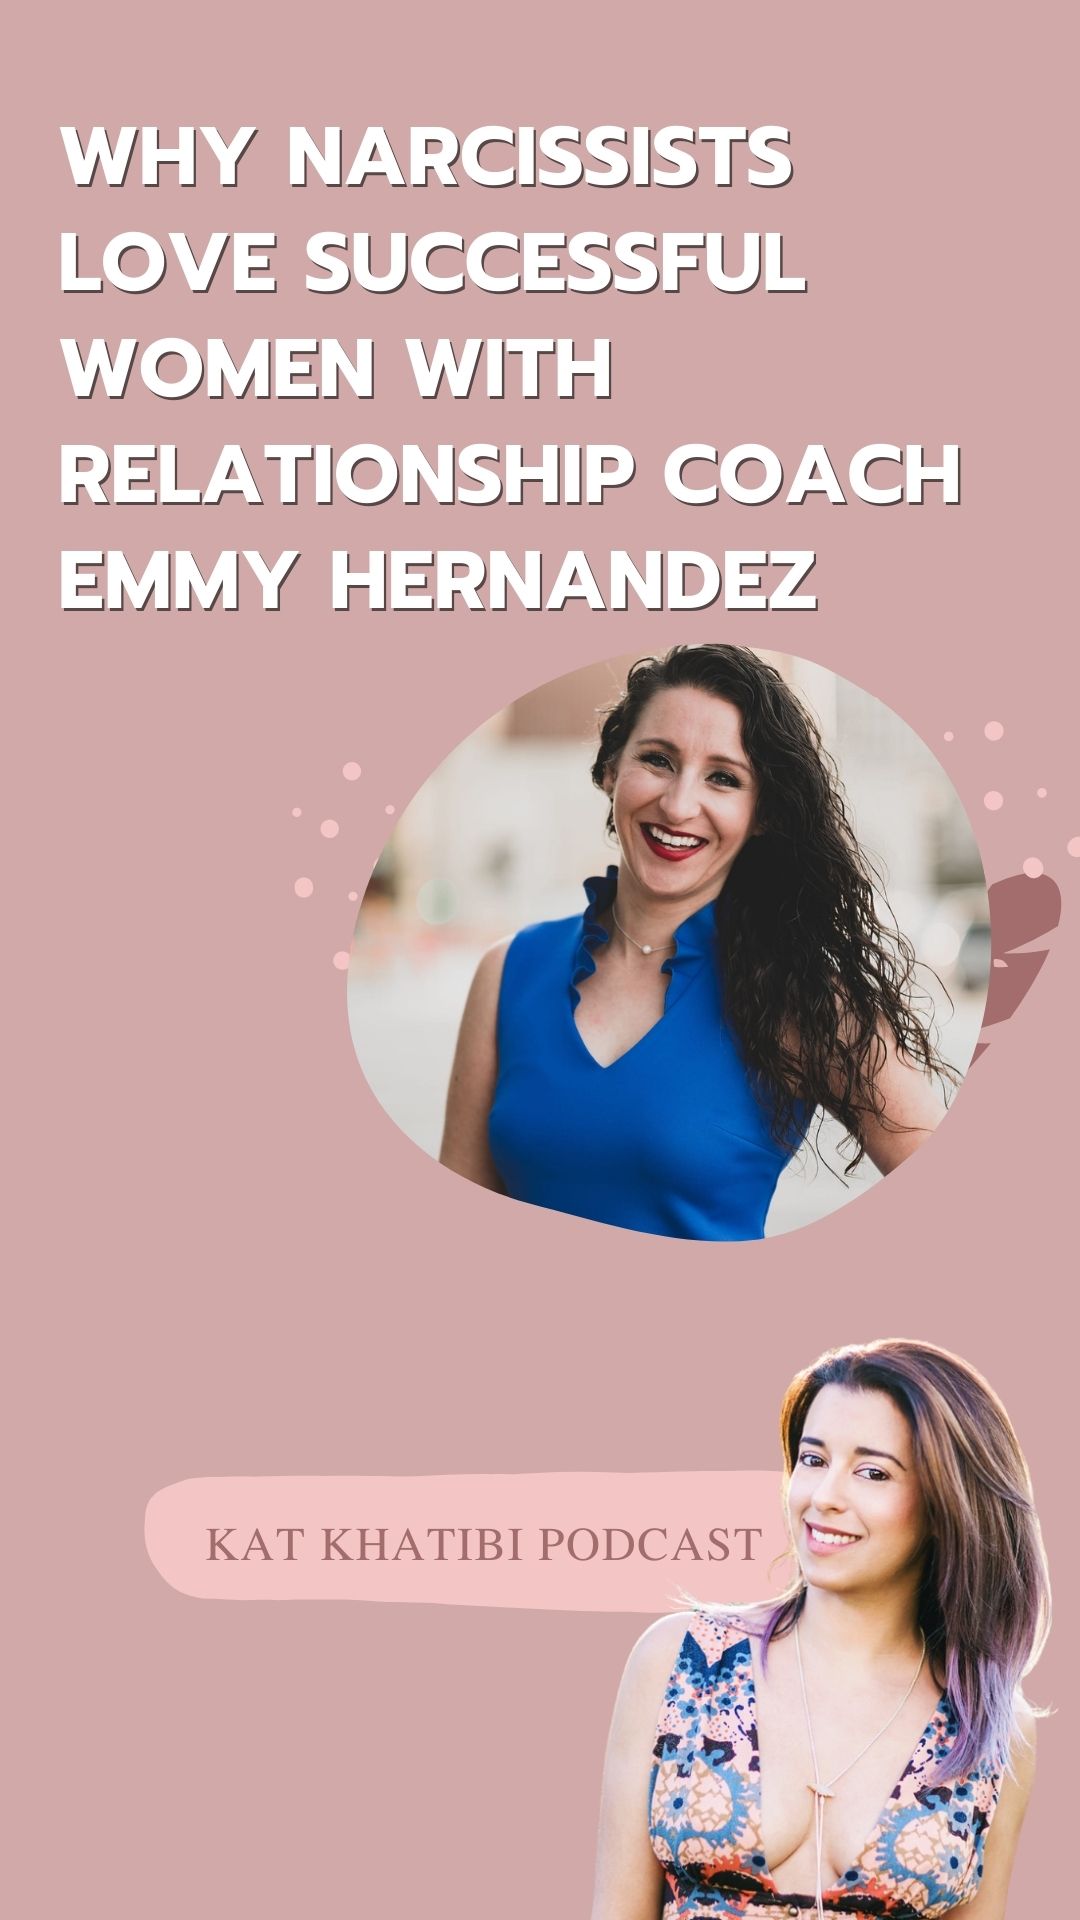 Why Narcissists Love Successful Women with Relationship Coach Emmy Hernandez